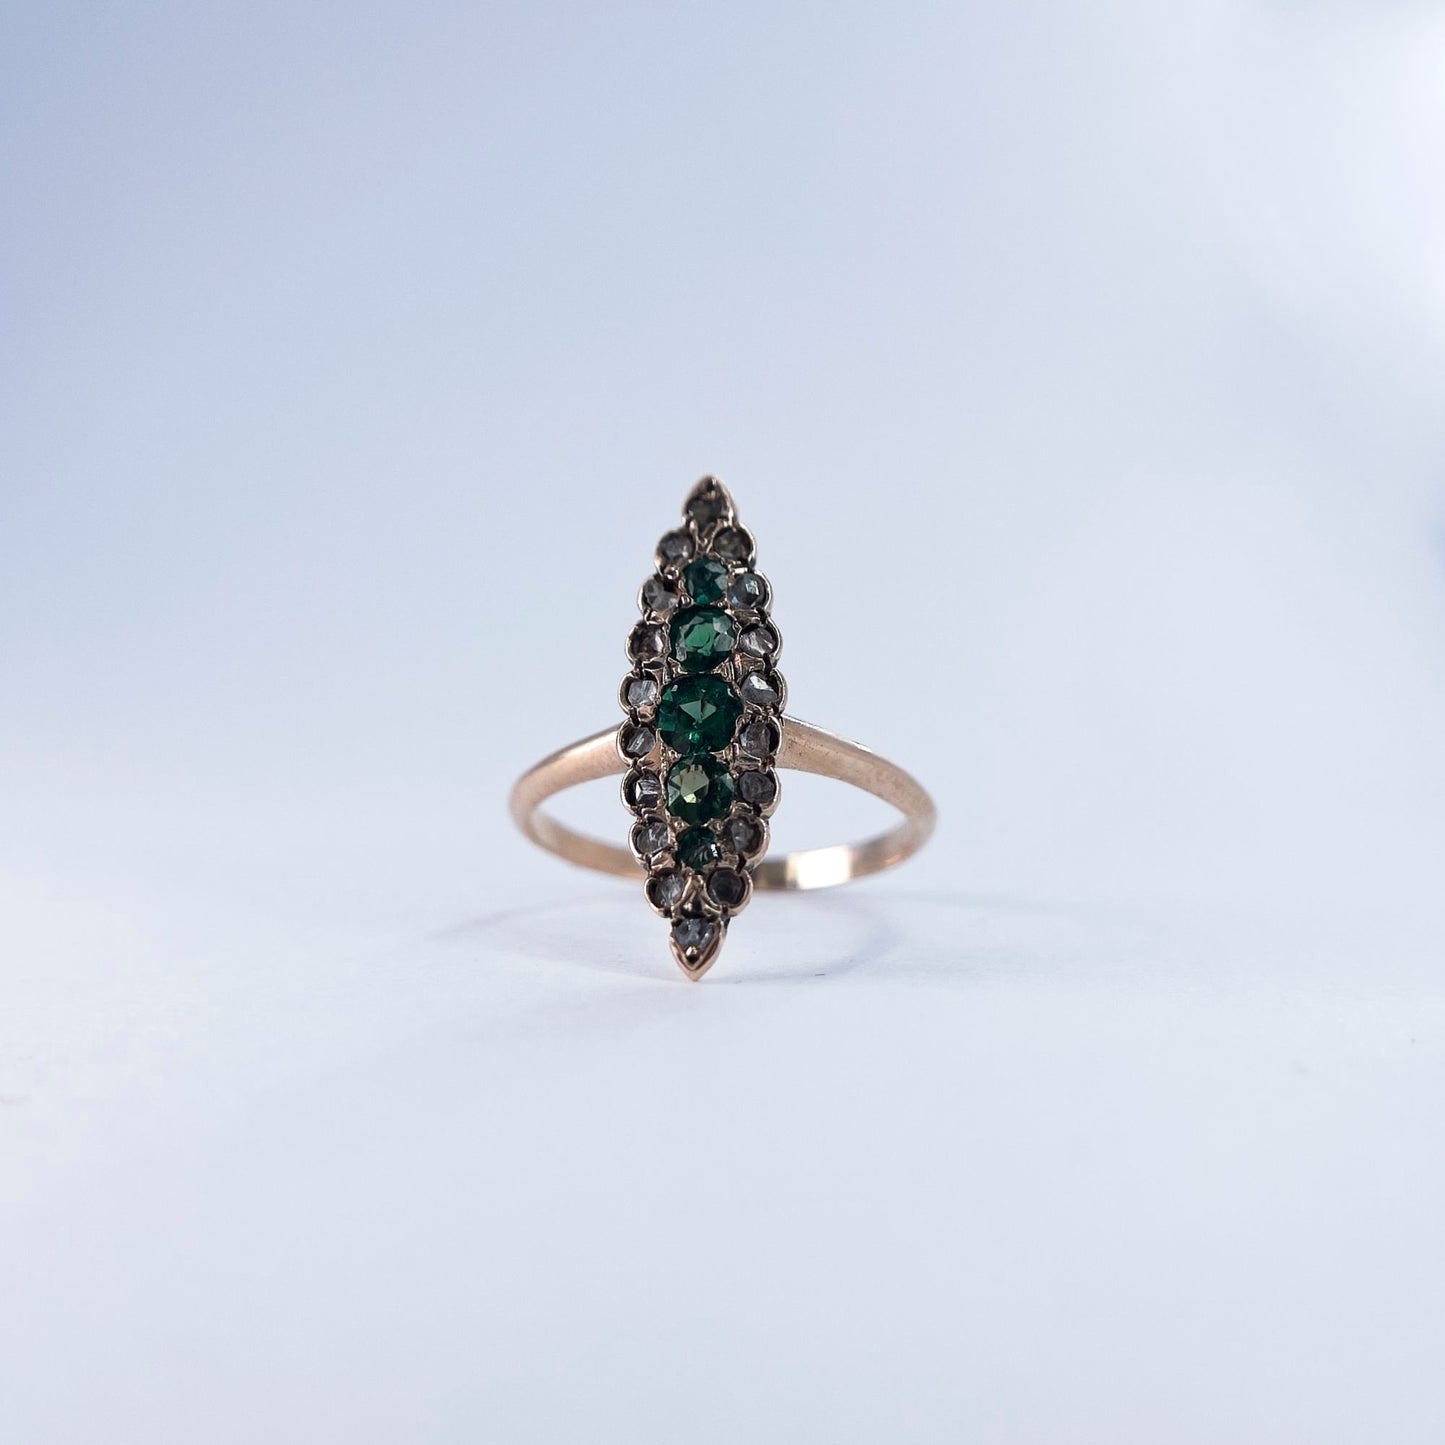 1800s Marquise Dainty Single Cut Diamond and Russian Tsavorite Ring in 14K Rose Gold